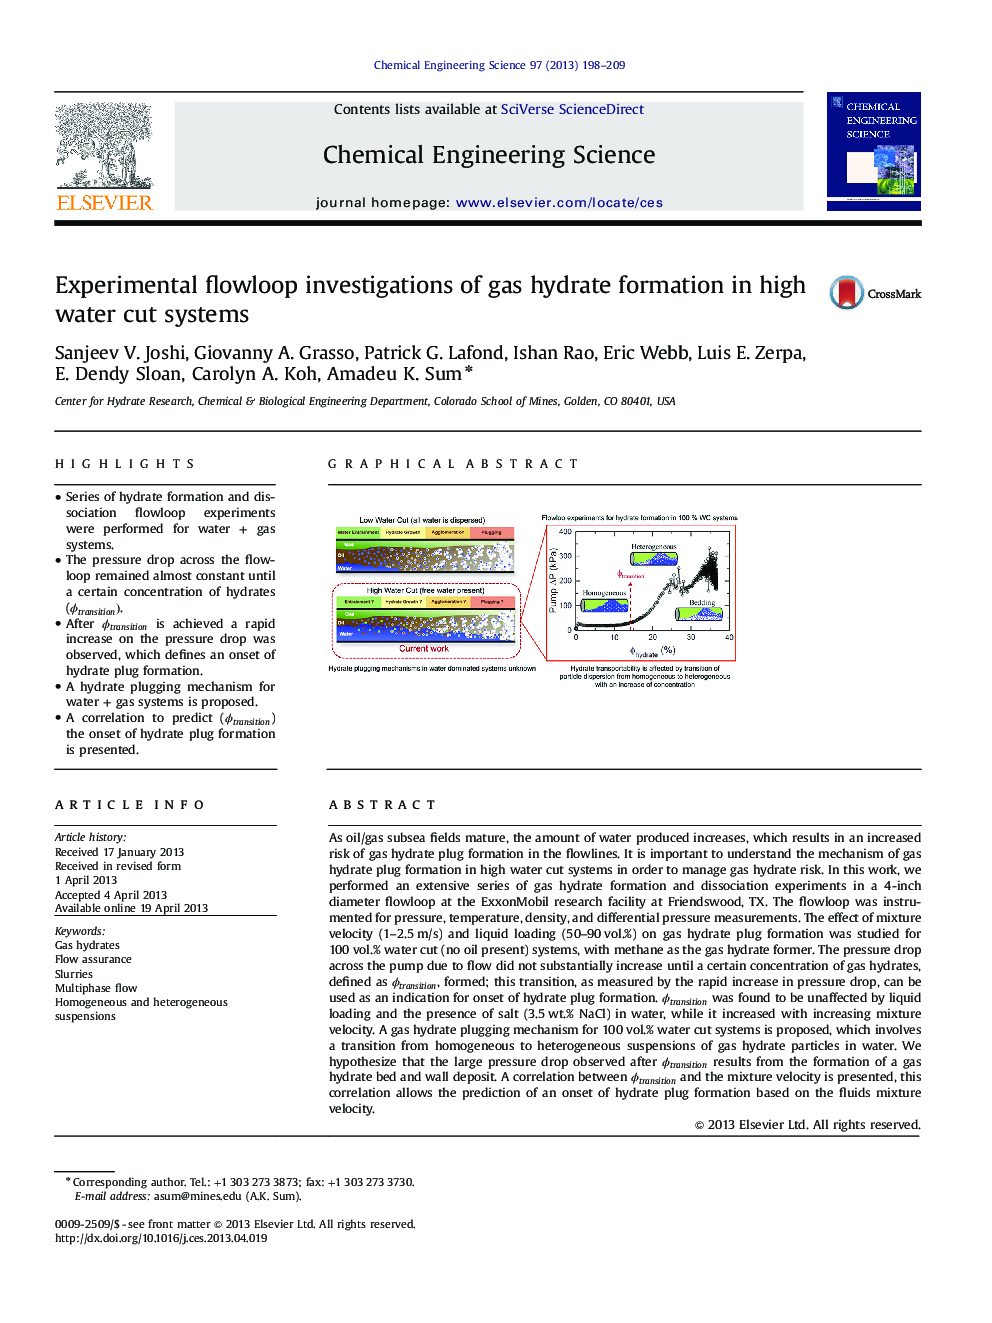 Experimental flowloop investigations of gas hydrate formation in high water cut systems